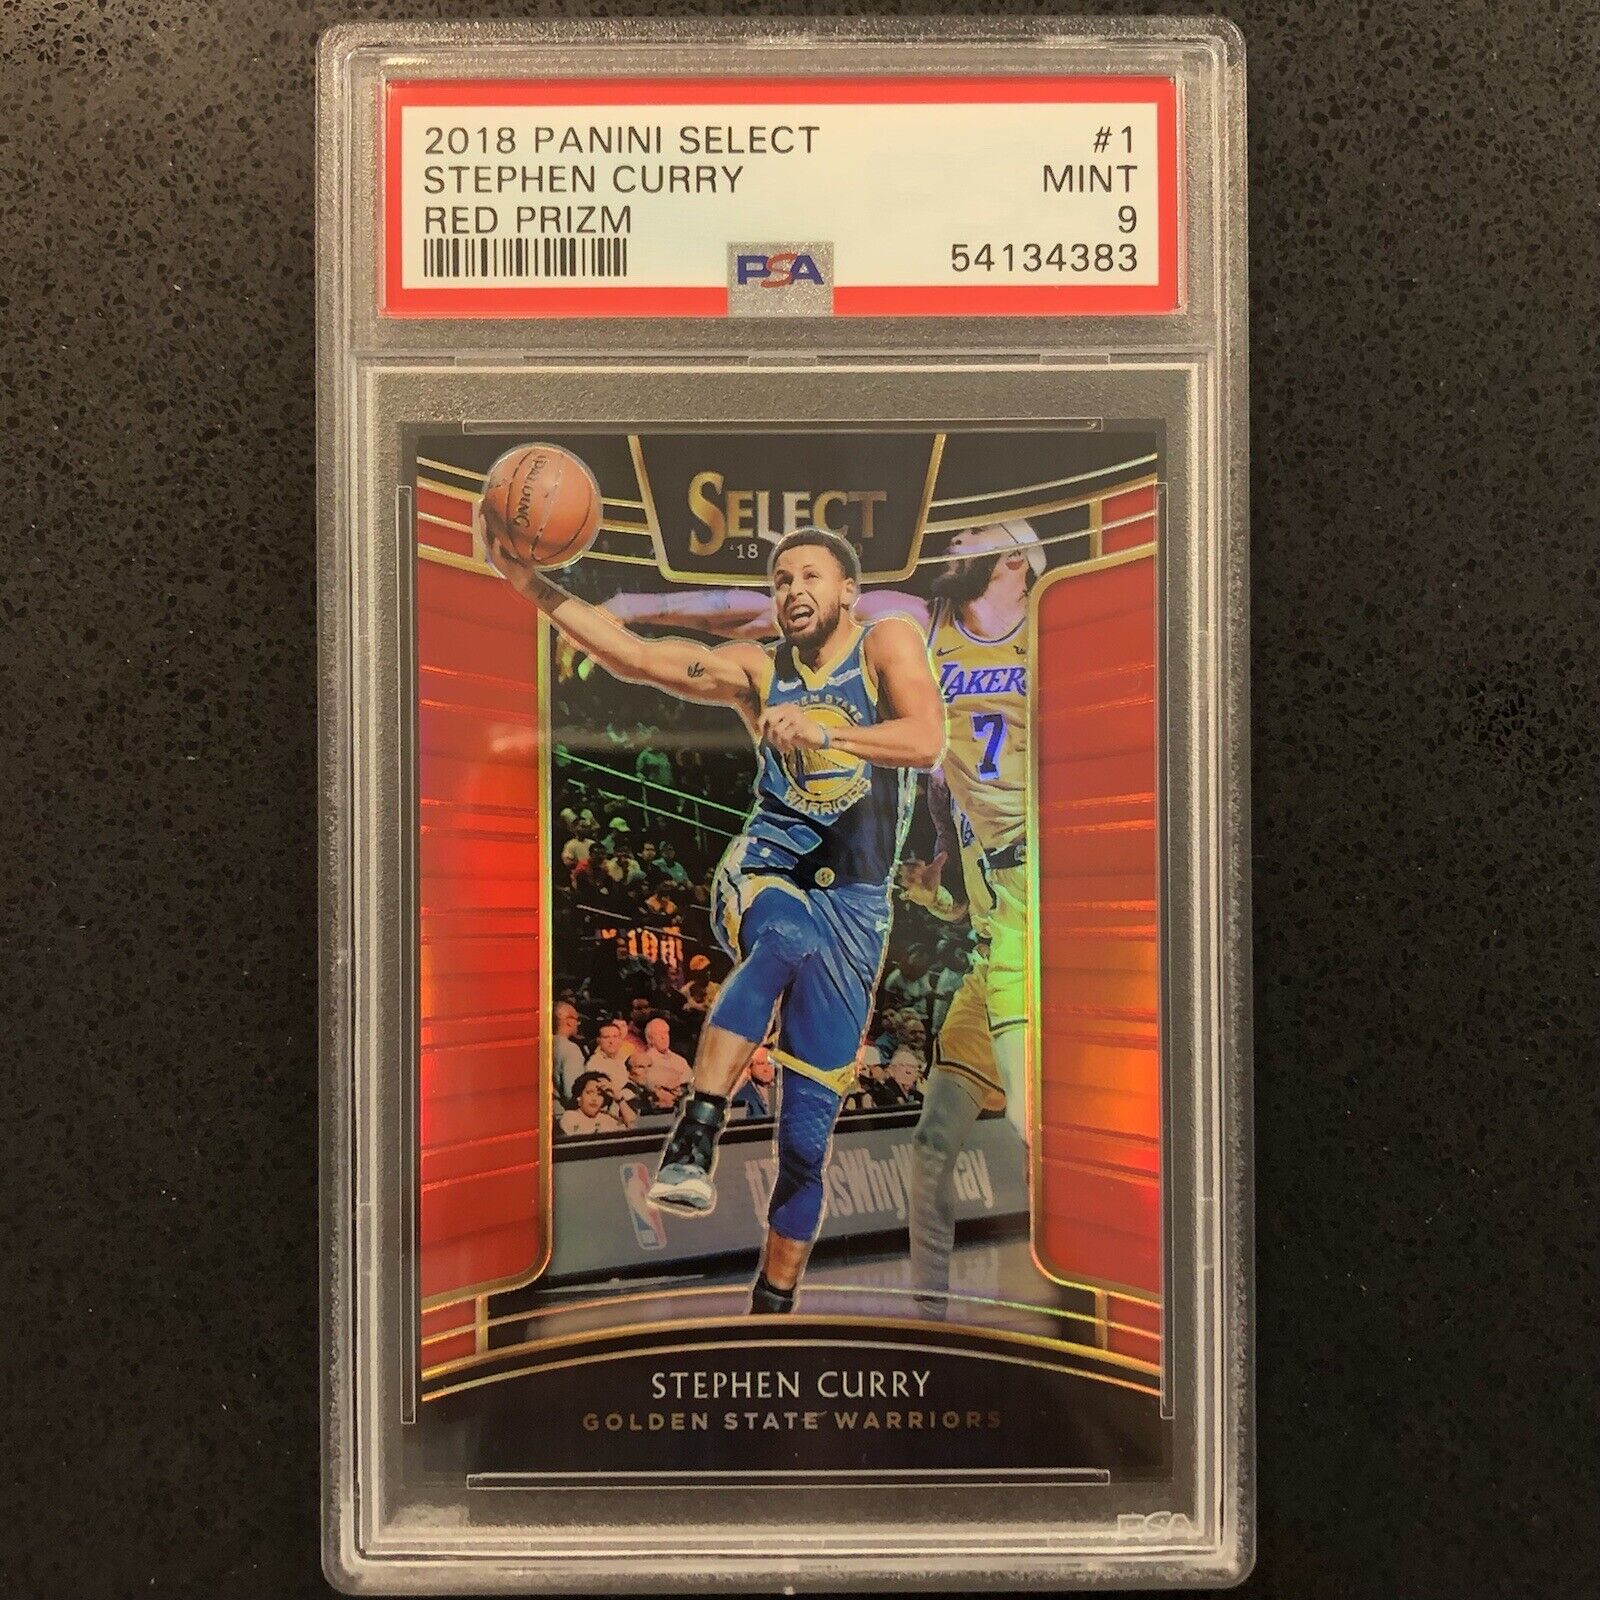 2018-19 Select Stephen Curry Concourse Red Prizm /199 MINT PSA 9